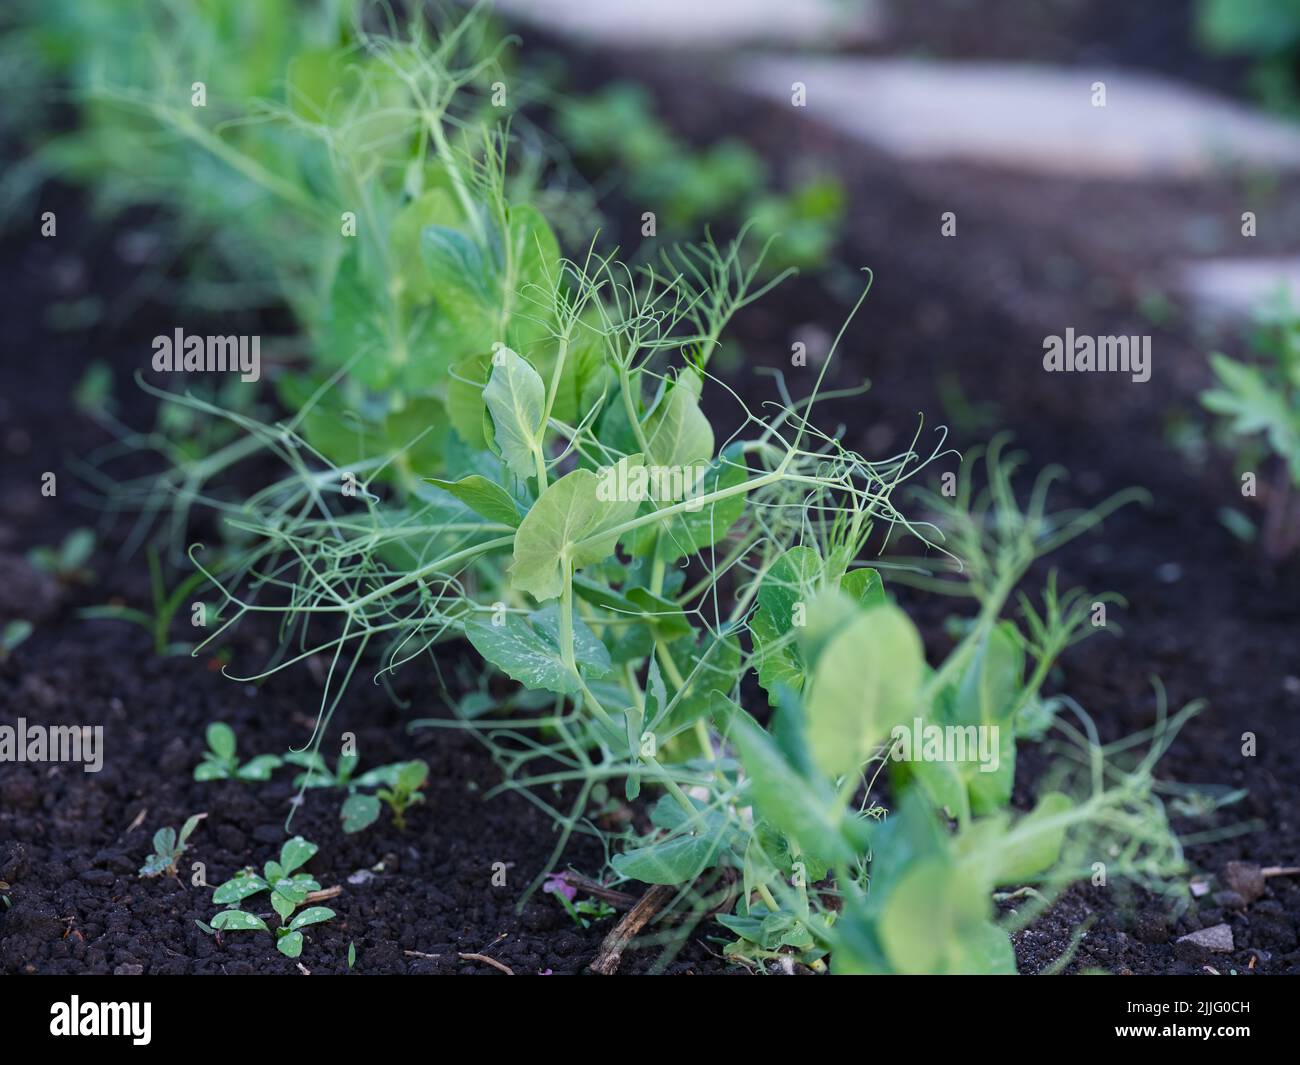 Young green pea plants growing in a vegetable garden Stock Photo